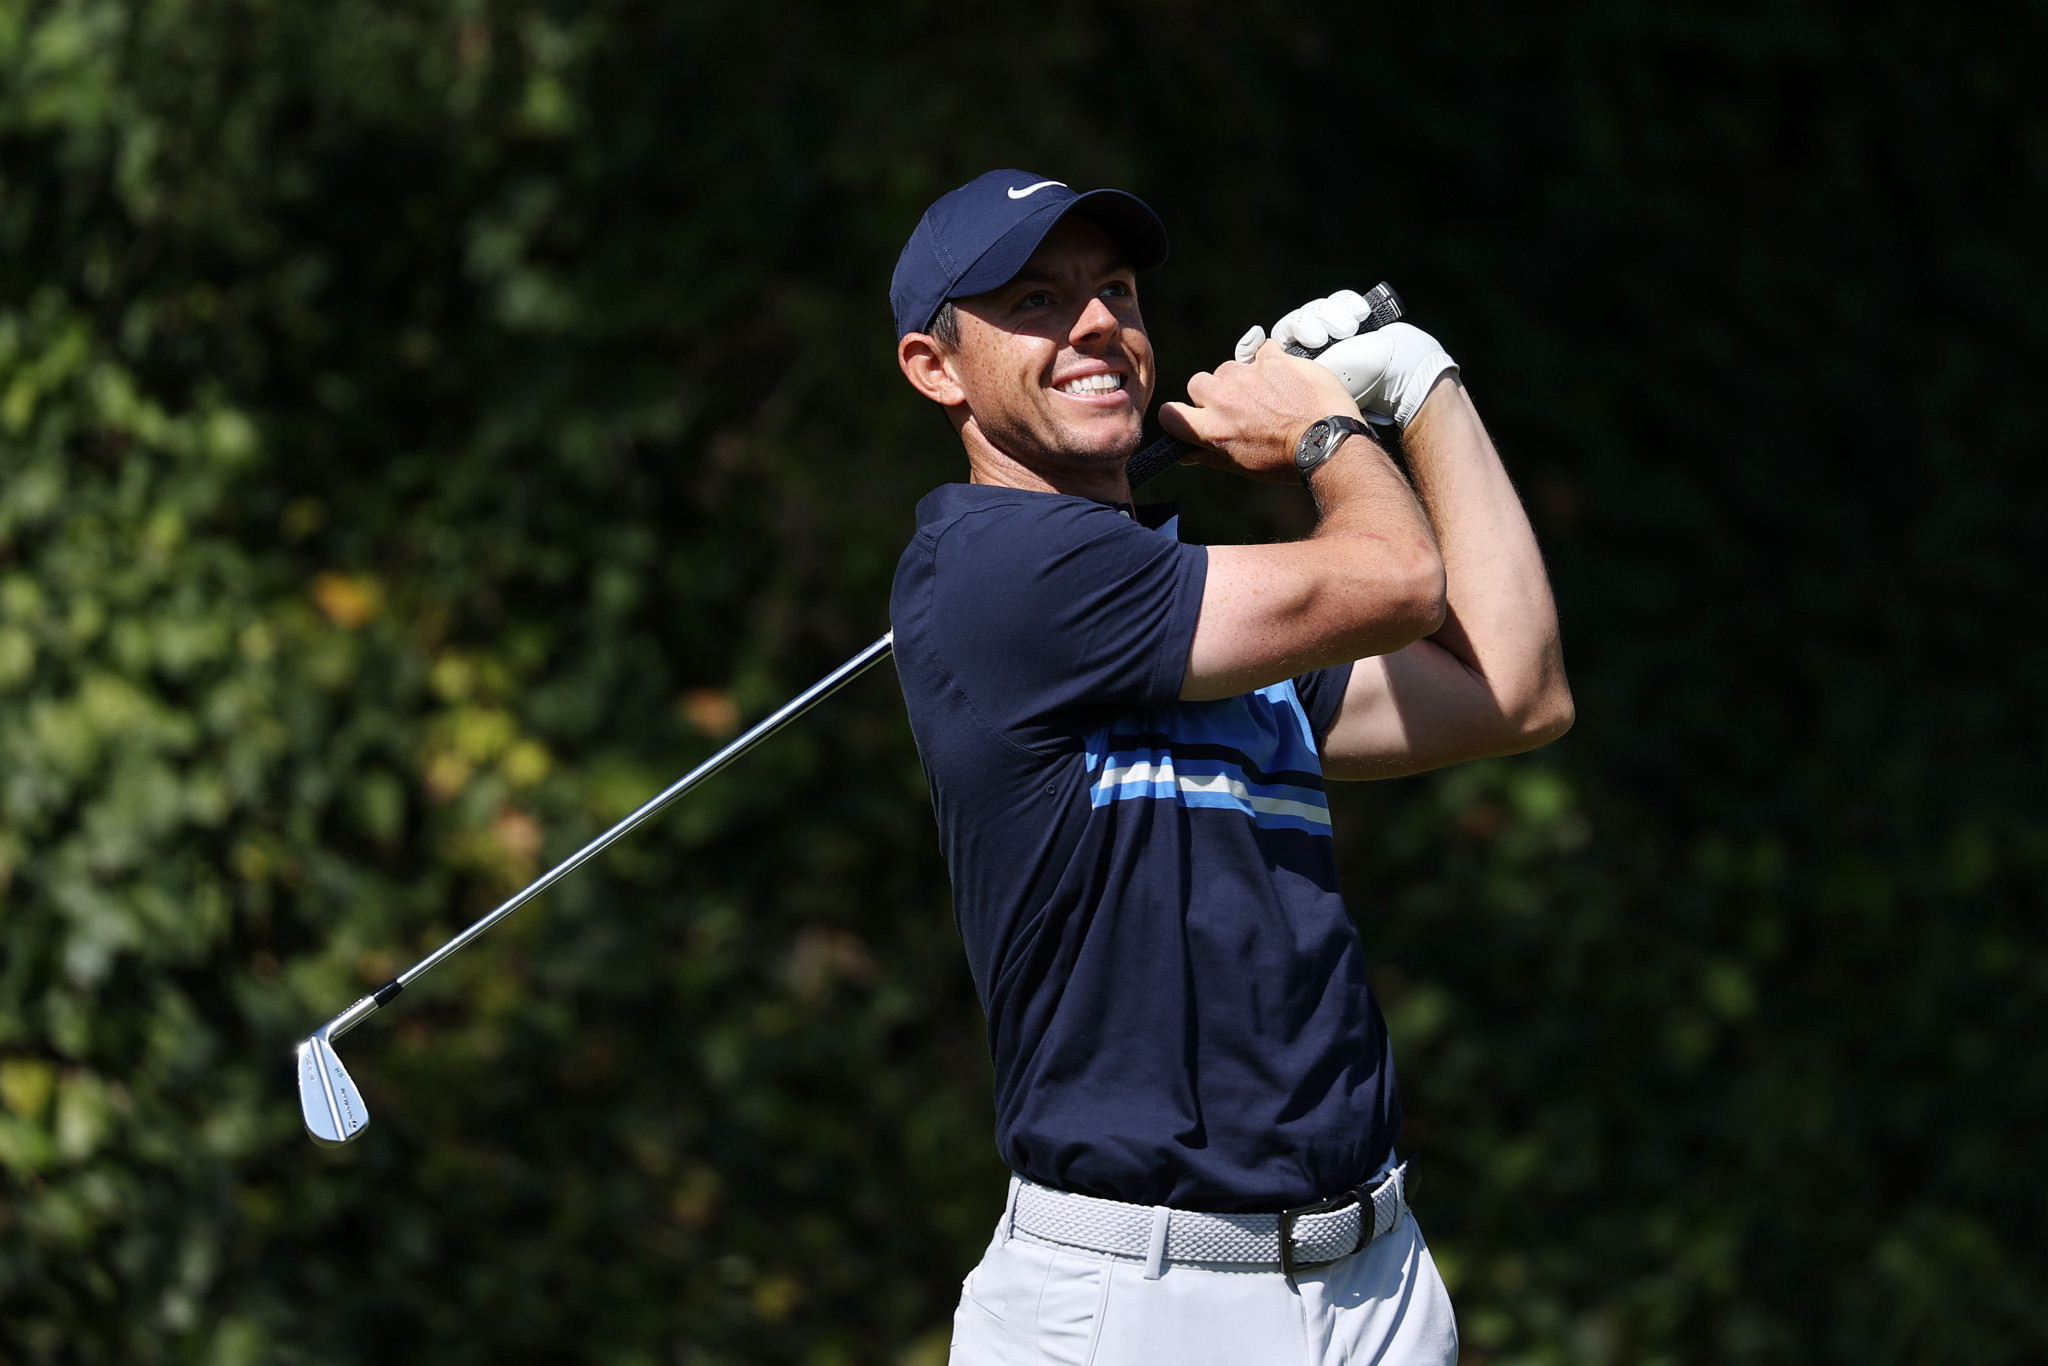 World number one Rory McIlroy is among the line-up for the WGC-Mexico Championship ©Getty Images